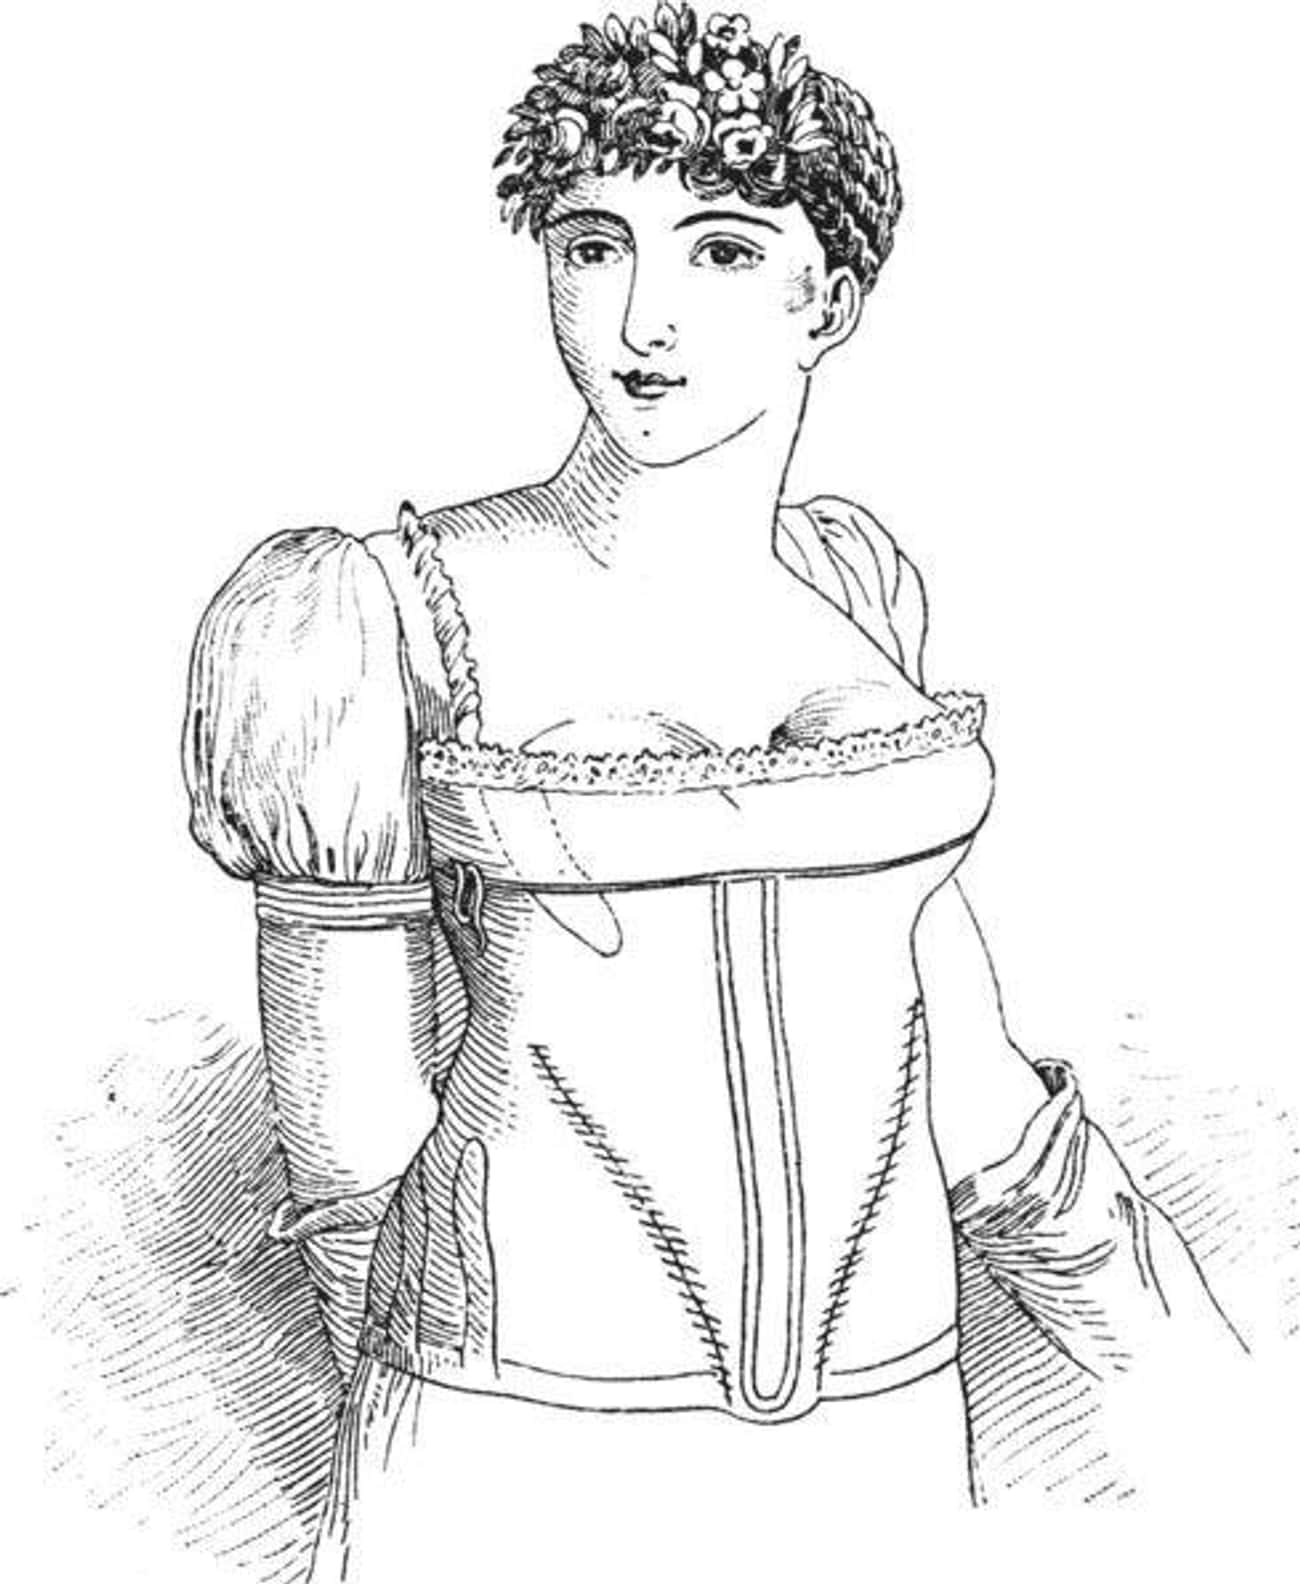 A Desire For Separated Breasts Created The &#34;Divorce Corset&#34;